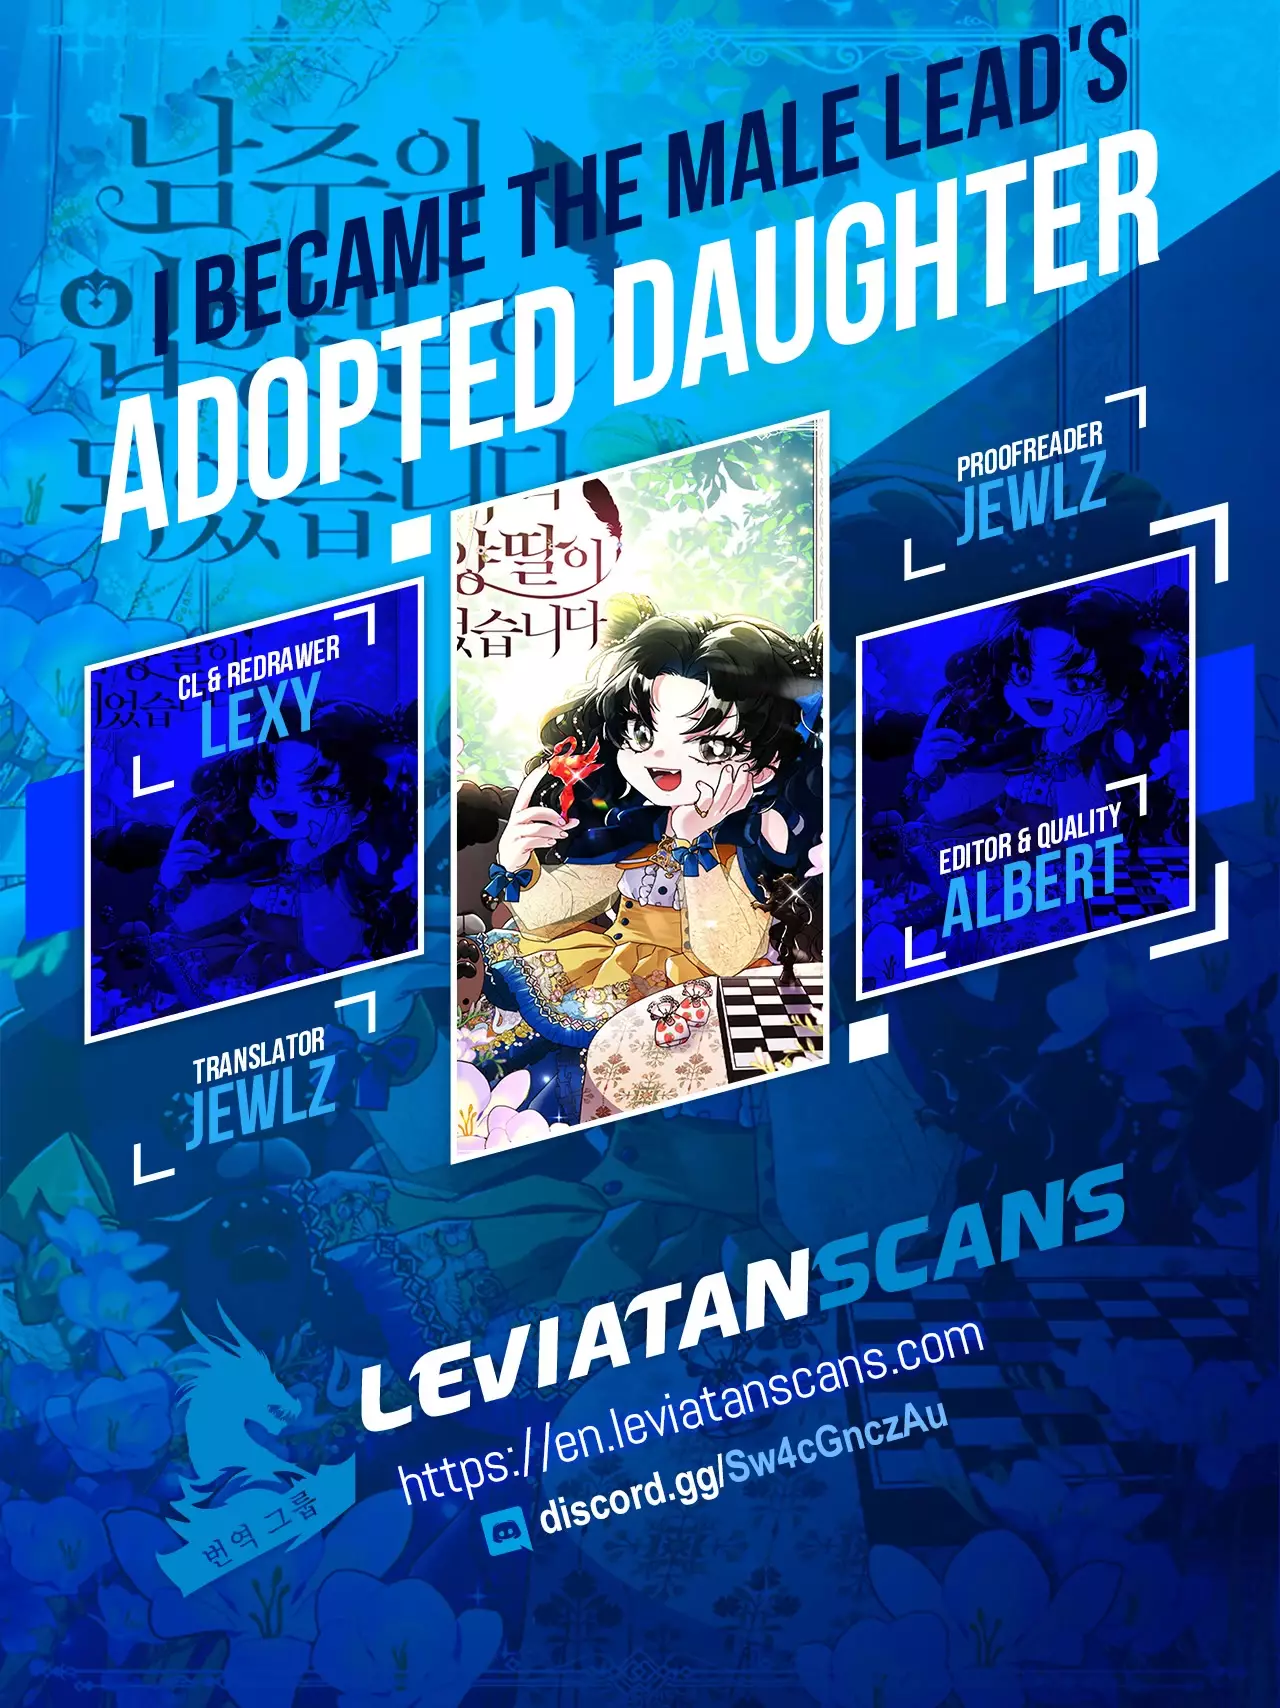 I Became The Male Lead’S Adopted Daughter - 55 page 1-8cd38be9